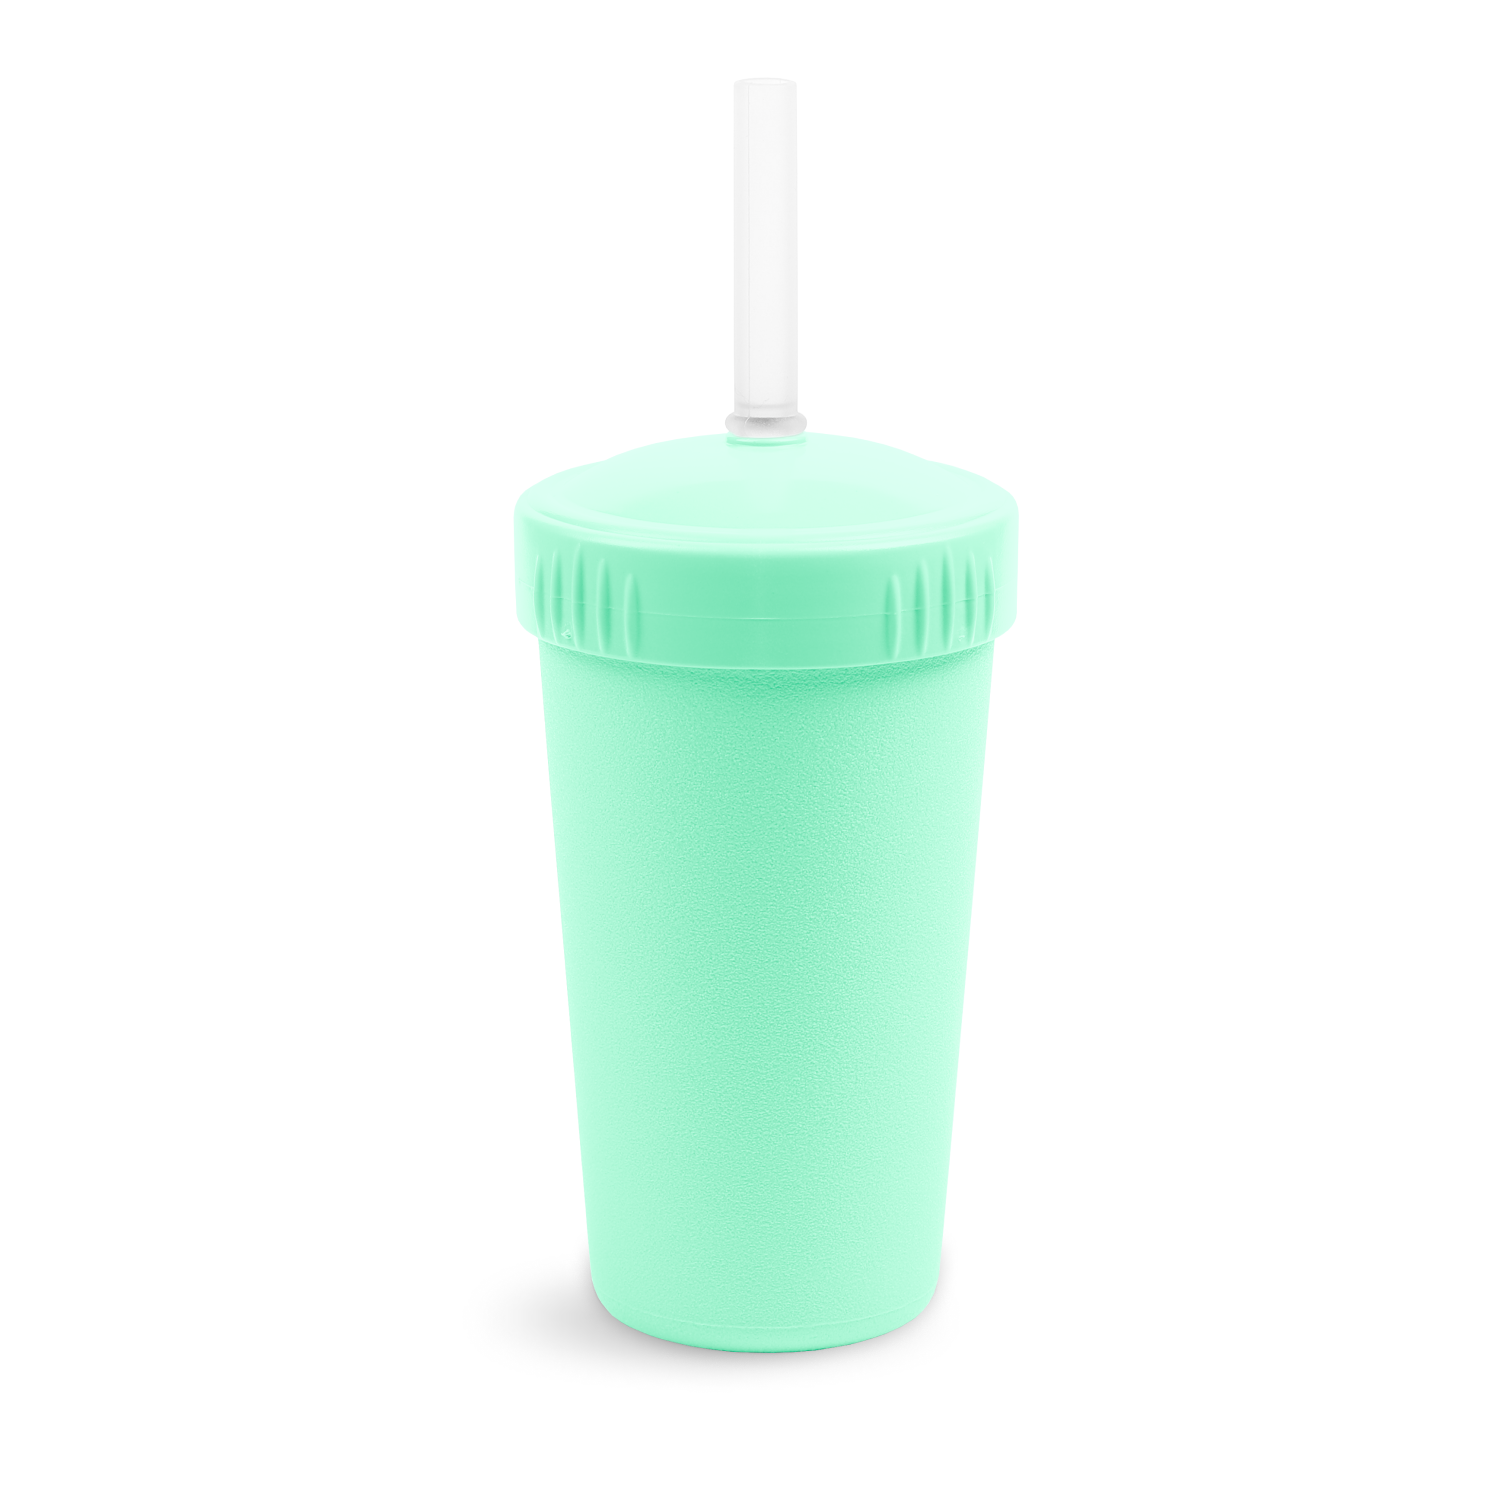 Silicone Straw Cups| Set of 2 | my-my 2 Straw- Set of 2 Mint, Moss